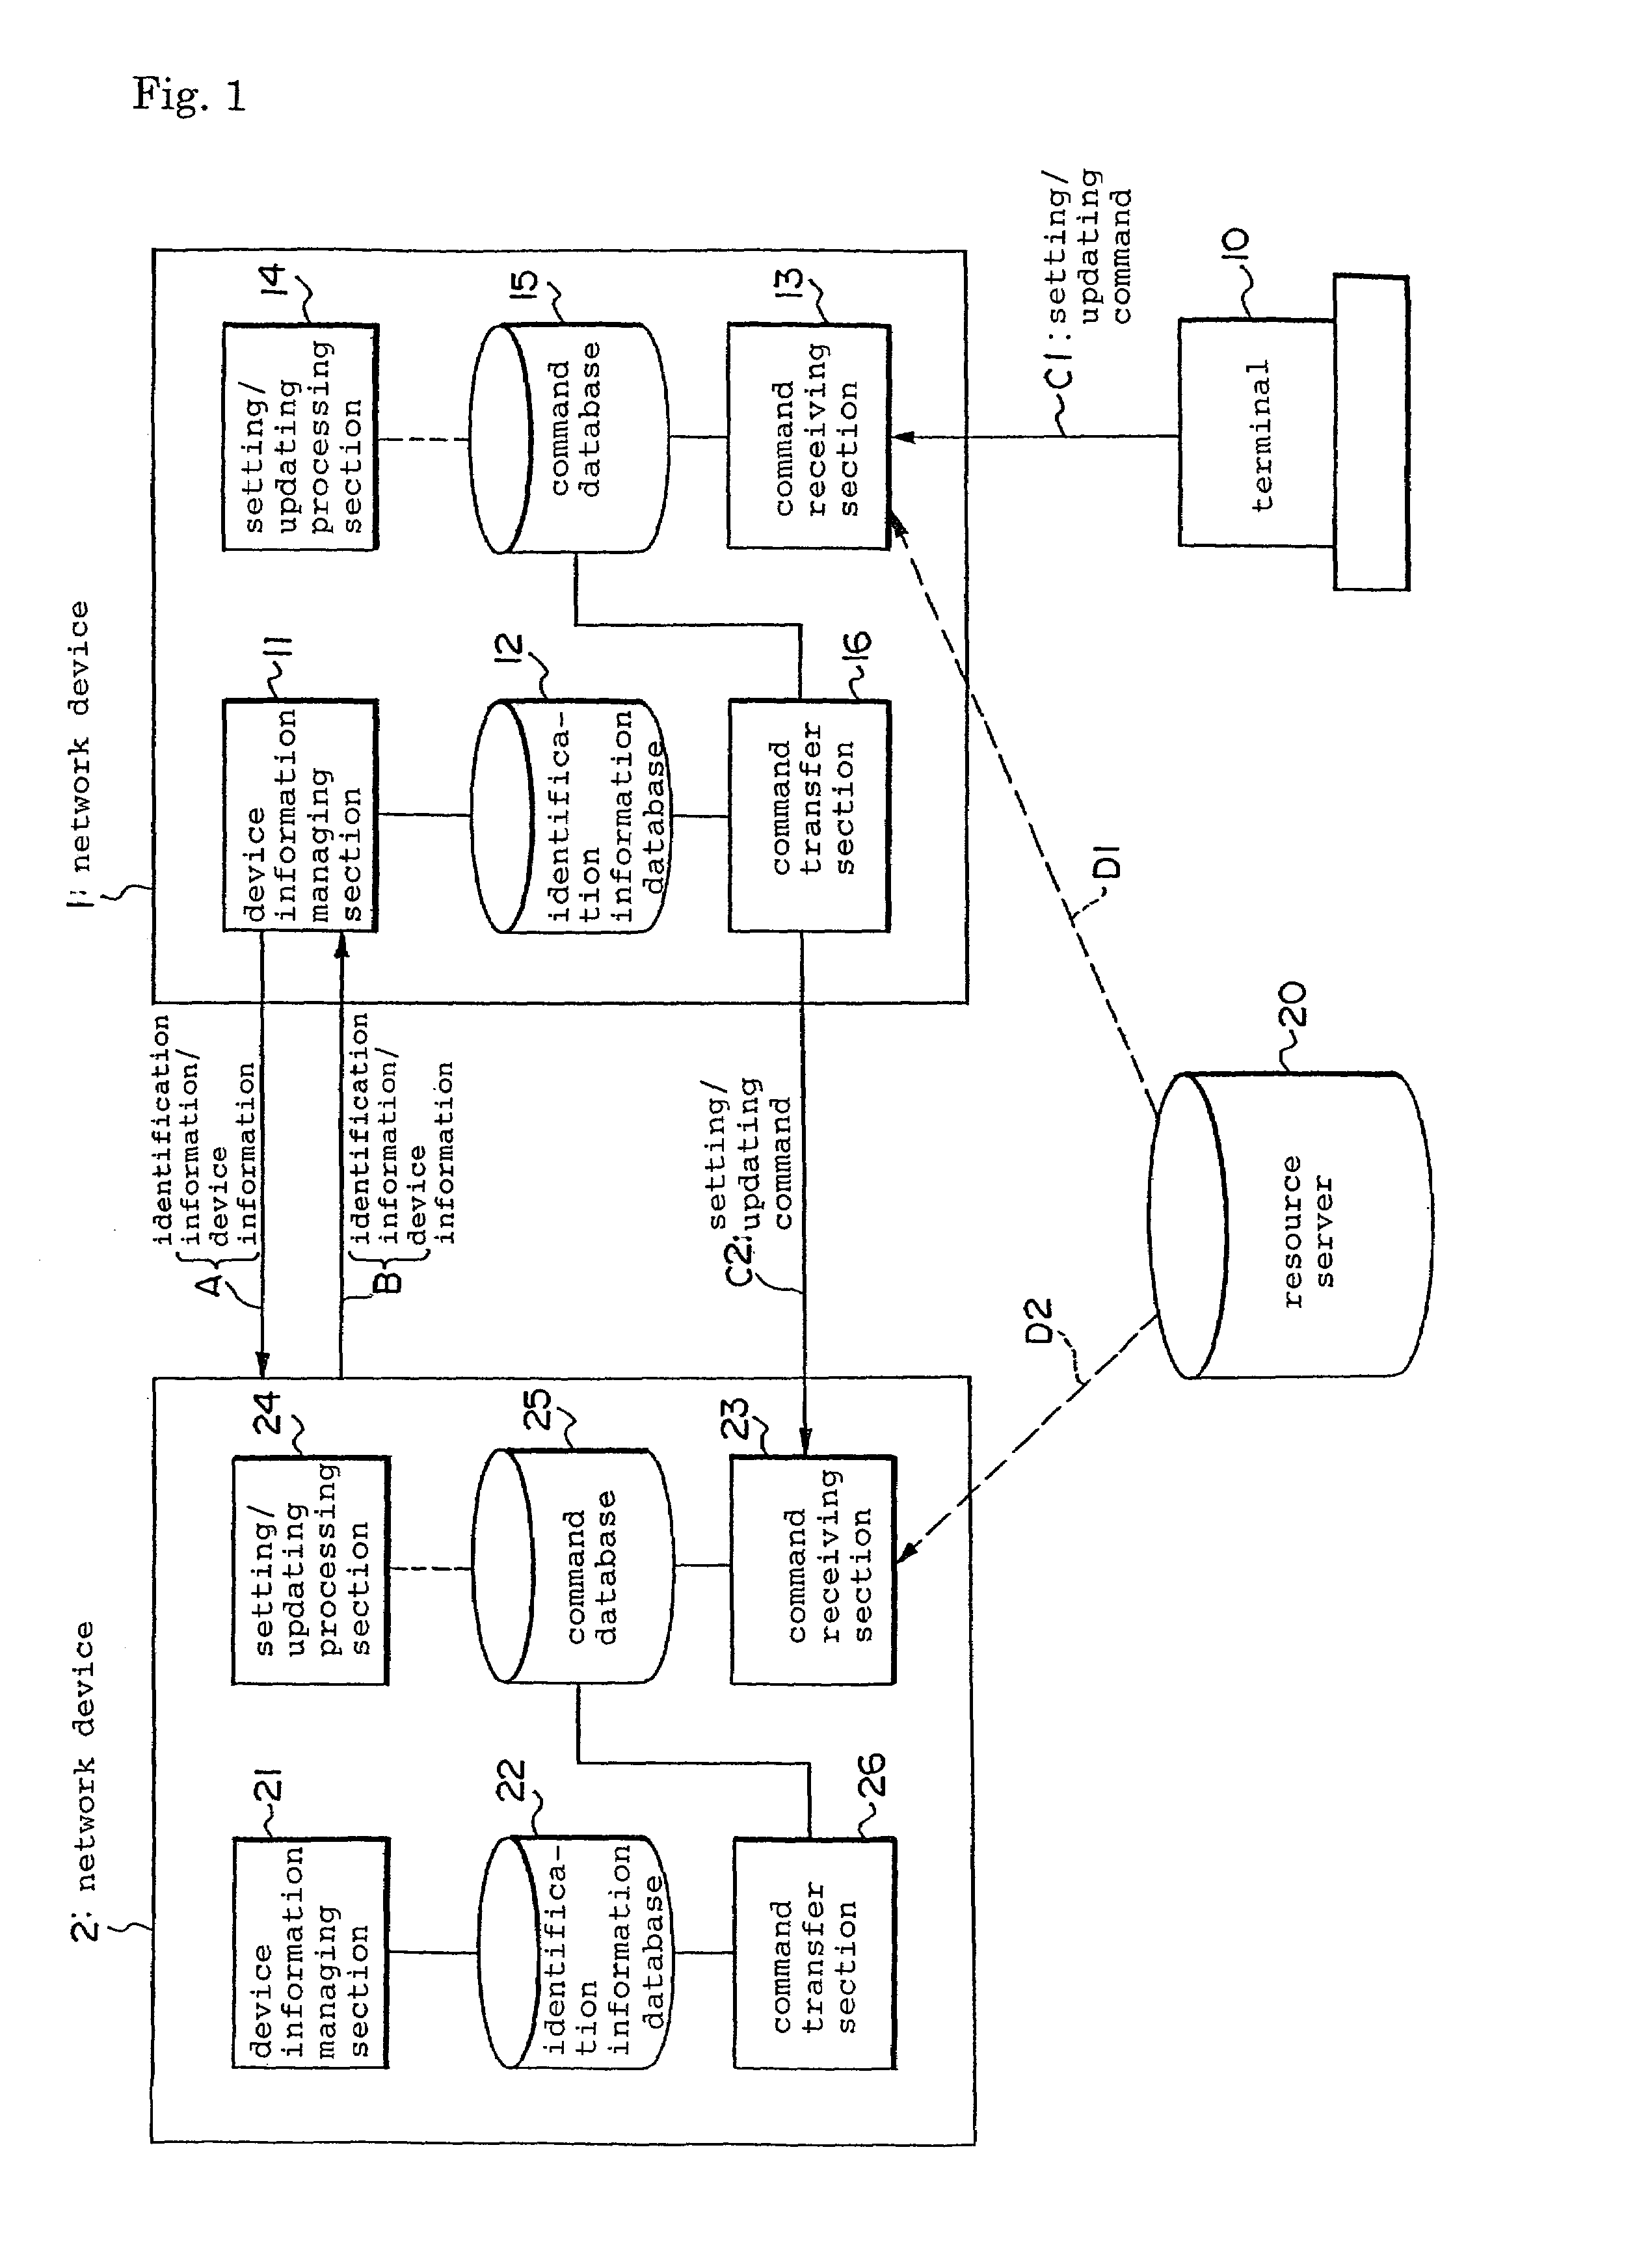 Network device management method, and network devices